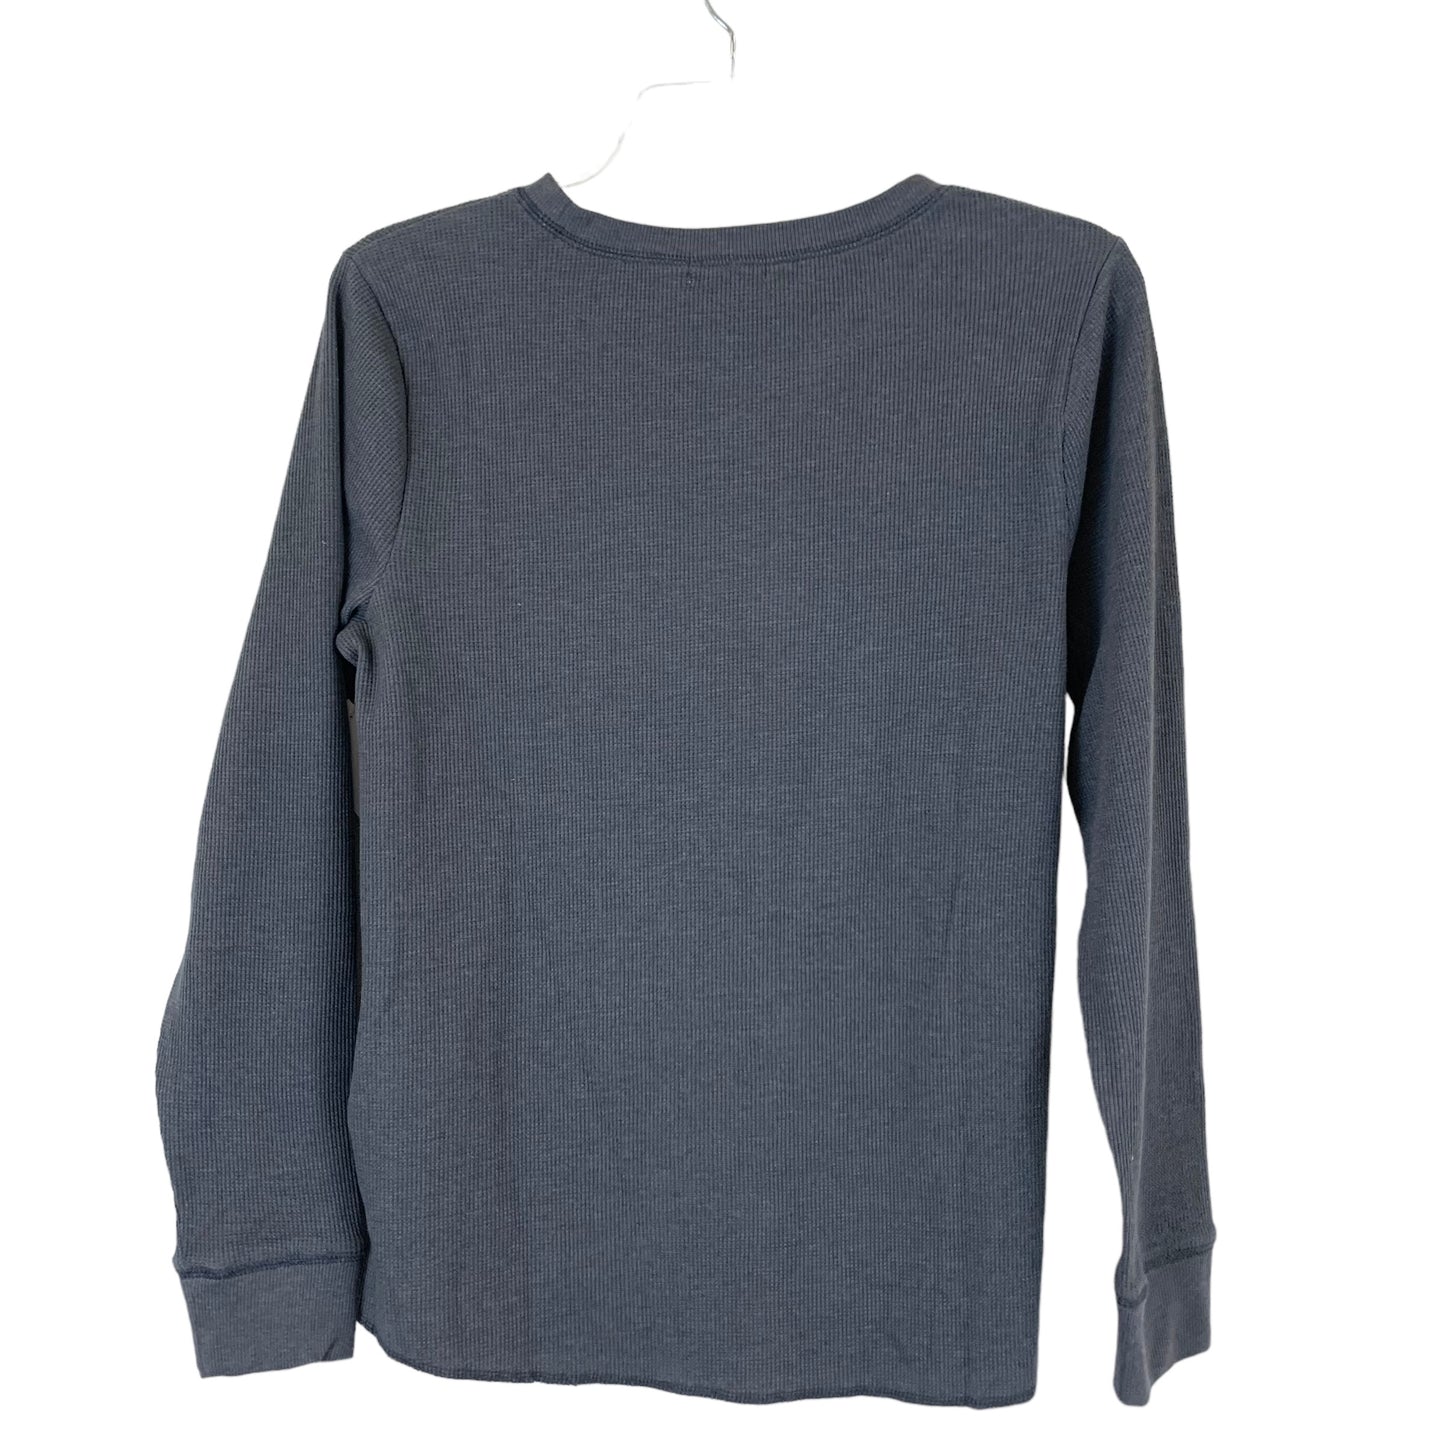 Top Long Sleeve Basic By Style And Company  Size: Petite Large